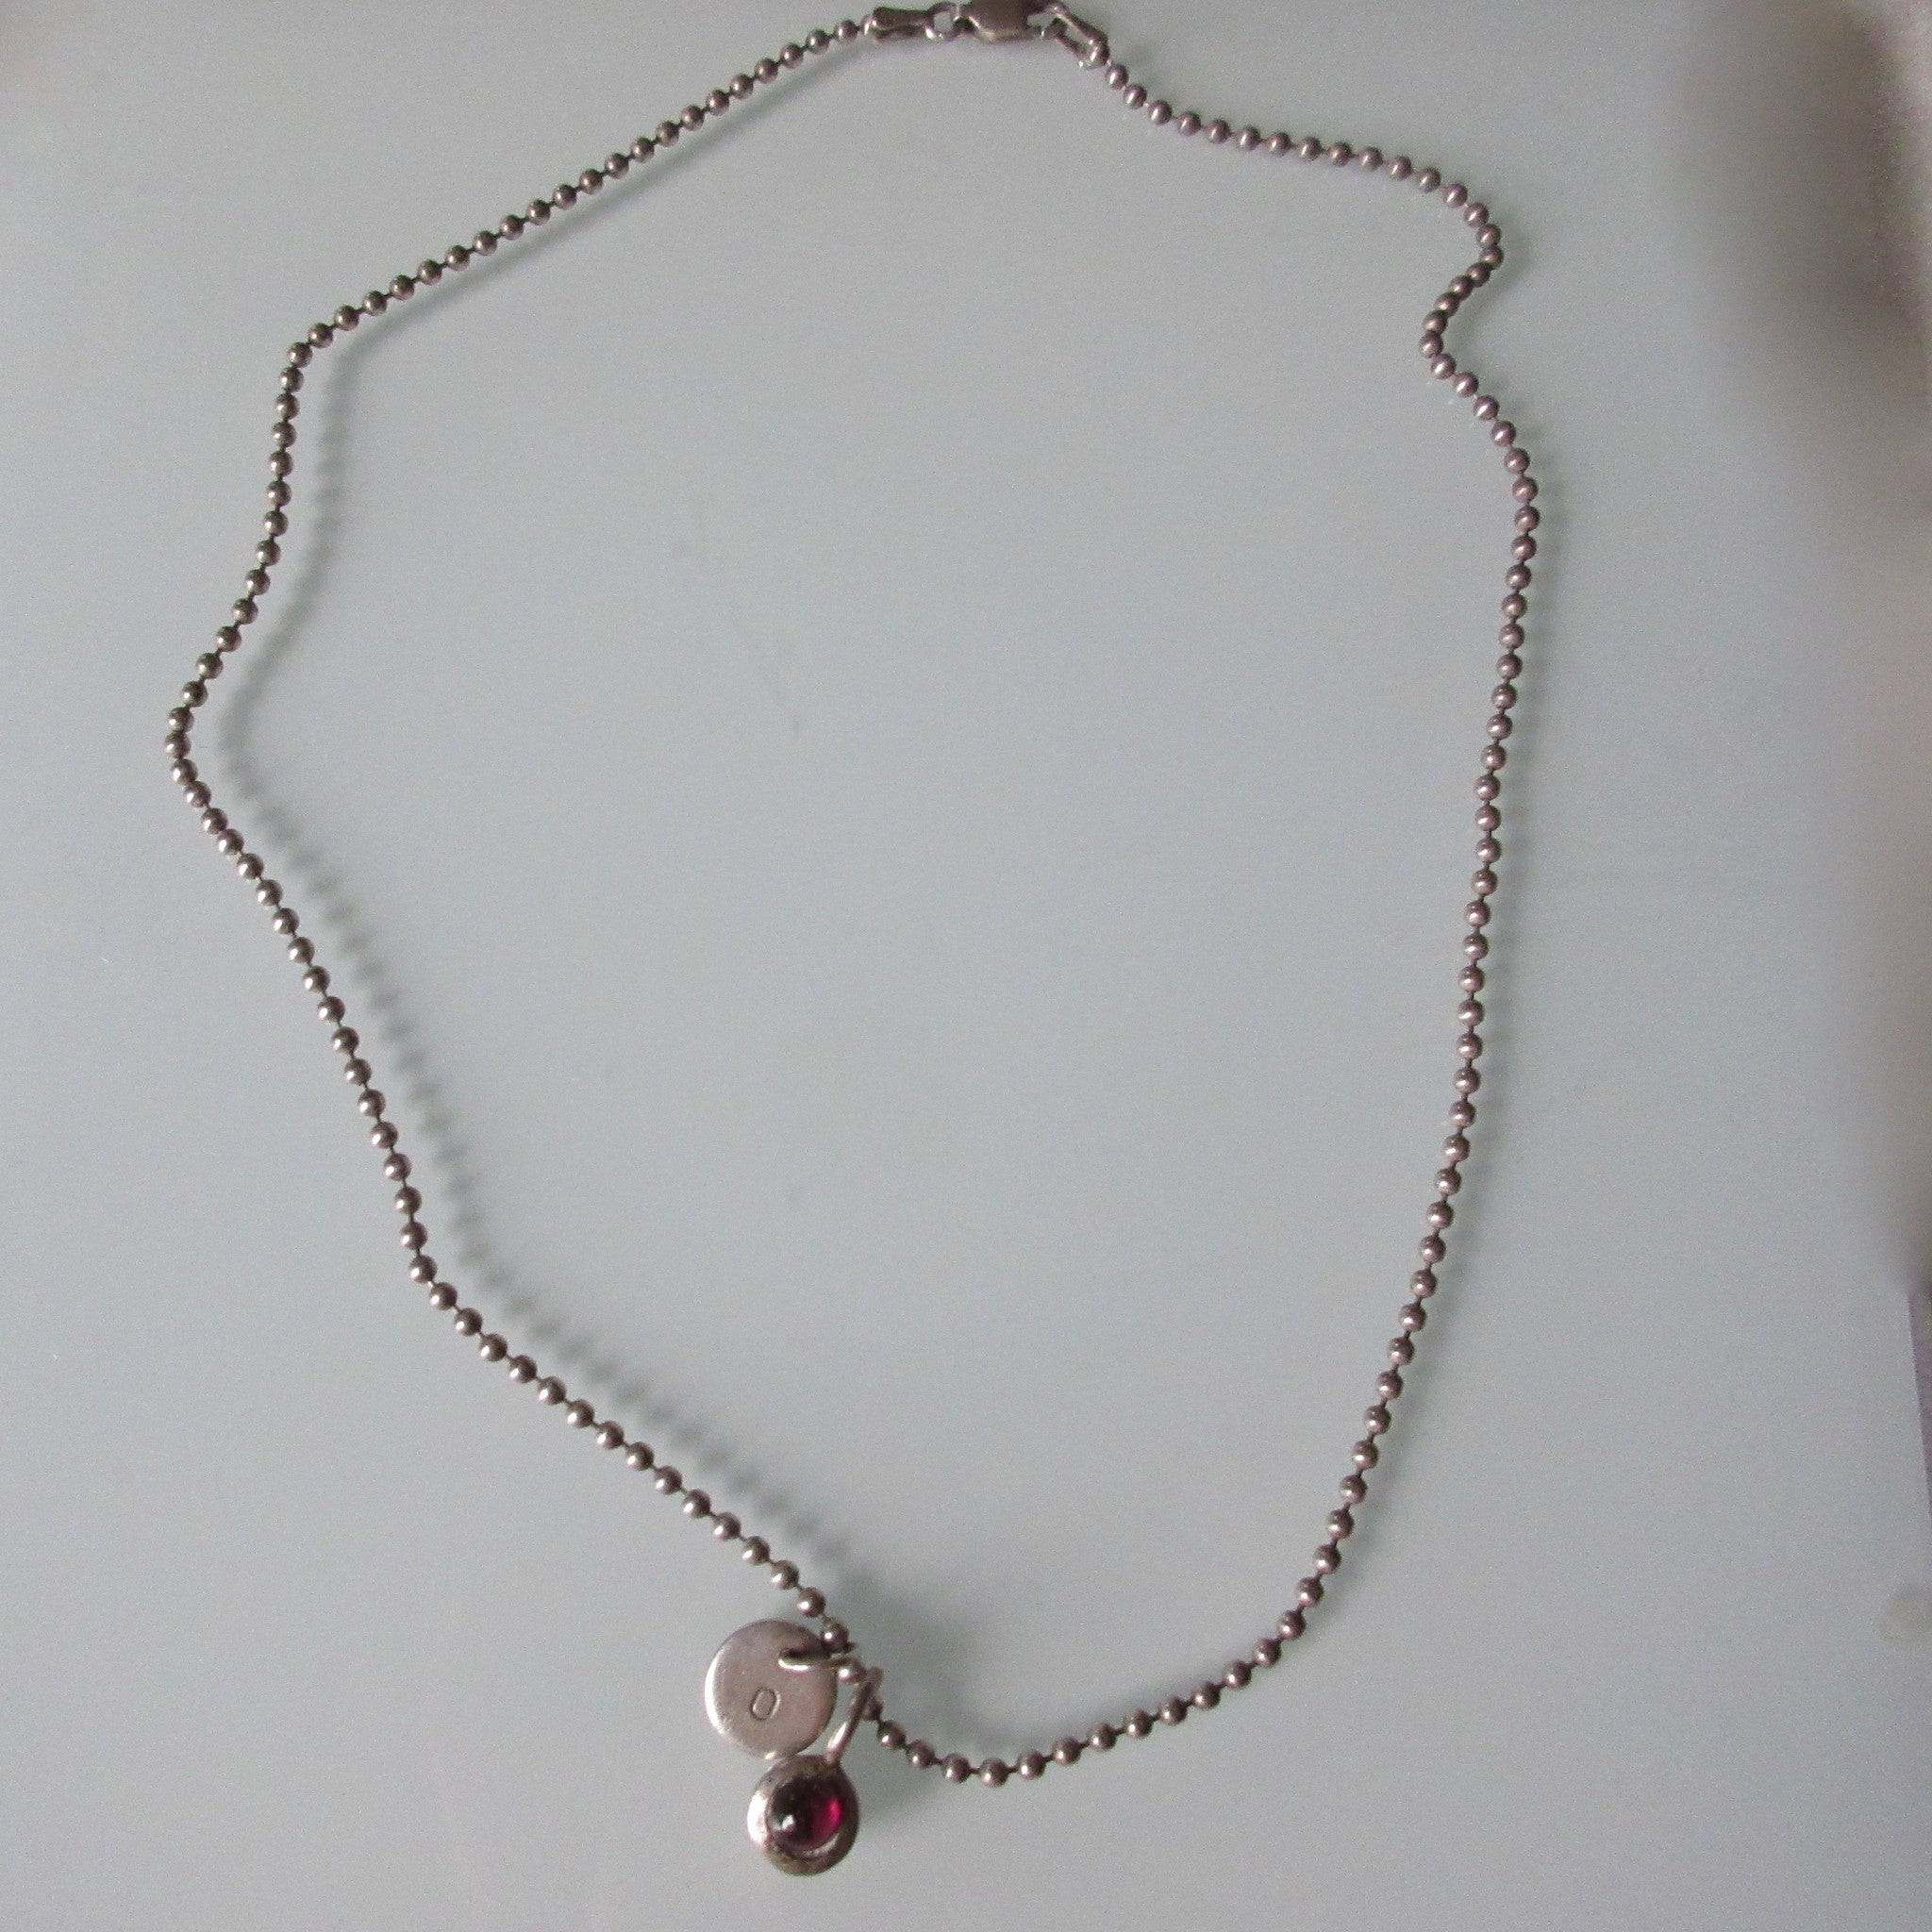 Moonstone Pendant  on Sterling Silver Chain 16"